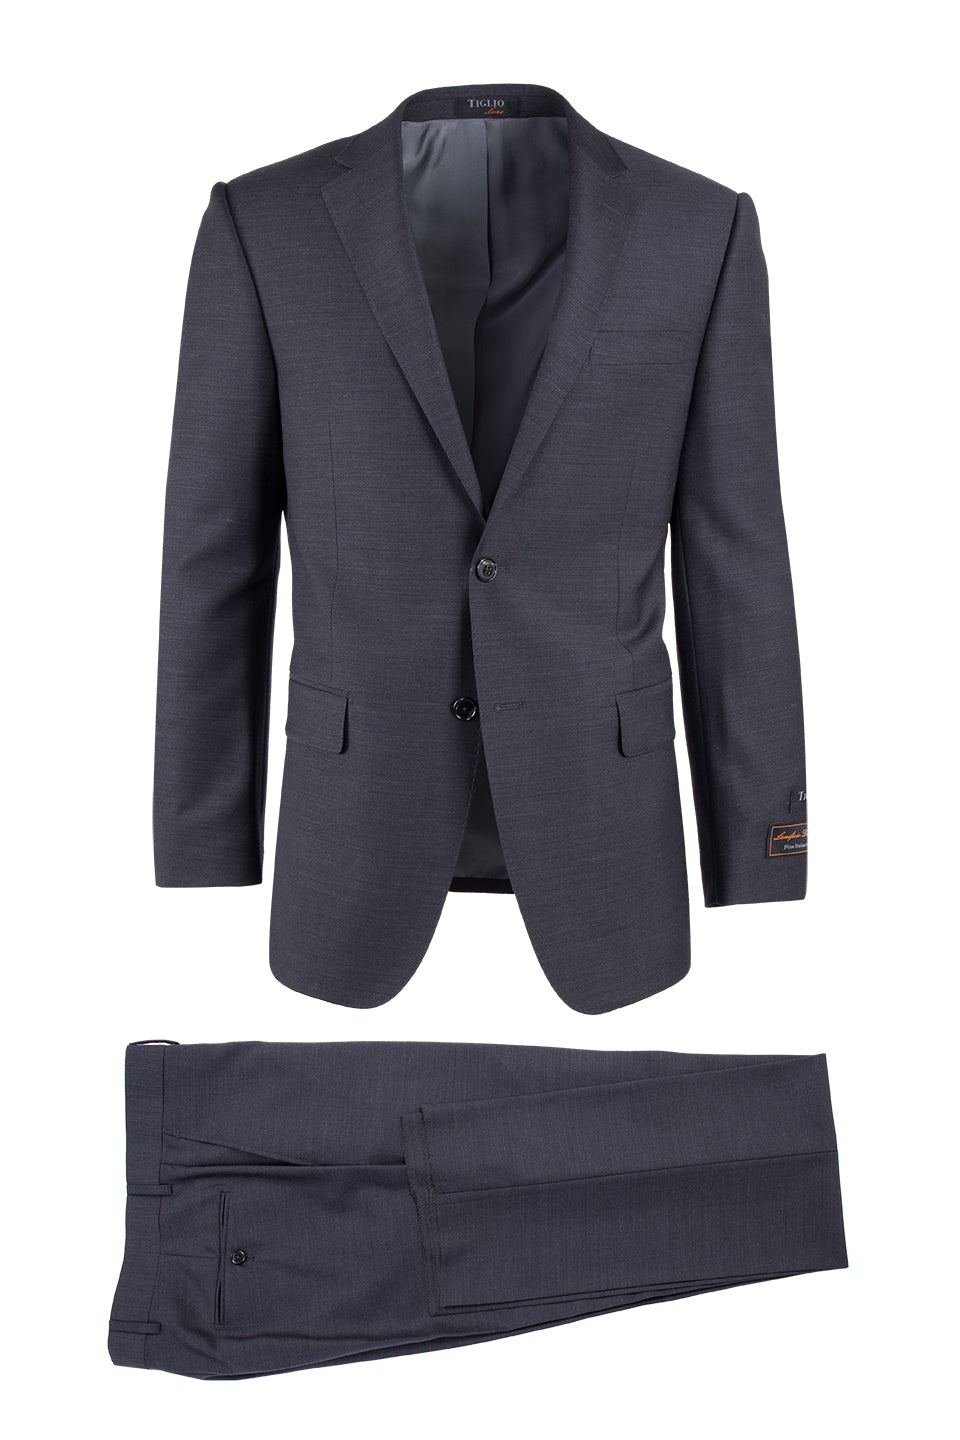 Novello Charcoal Gray, by Suit Fit, Luxe Modern Tiglio Tiglio | TIG10 Wool Pure